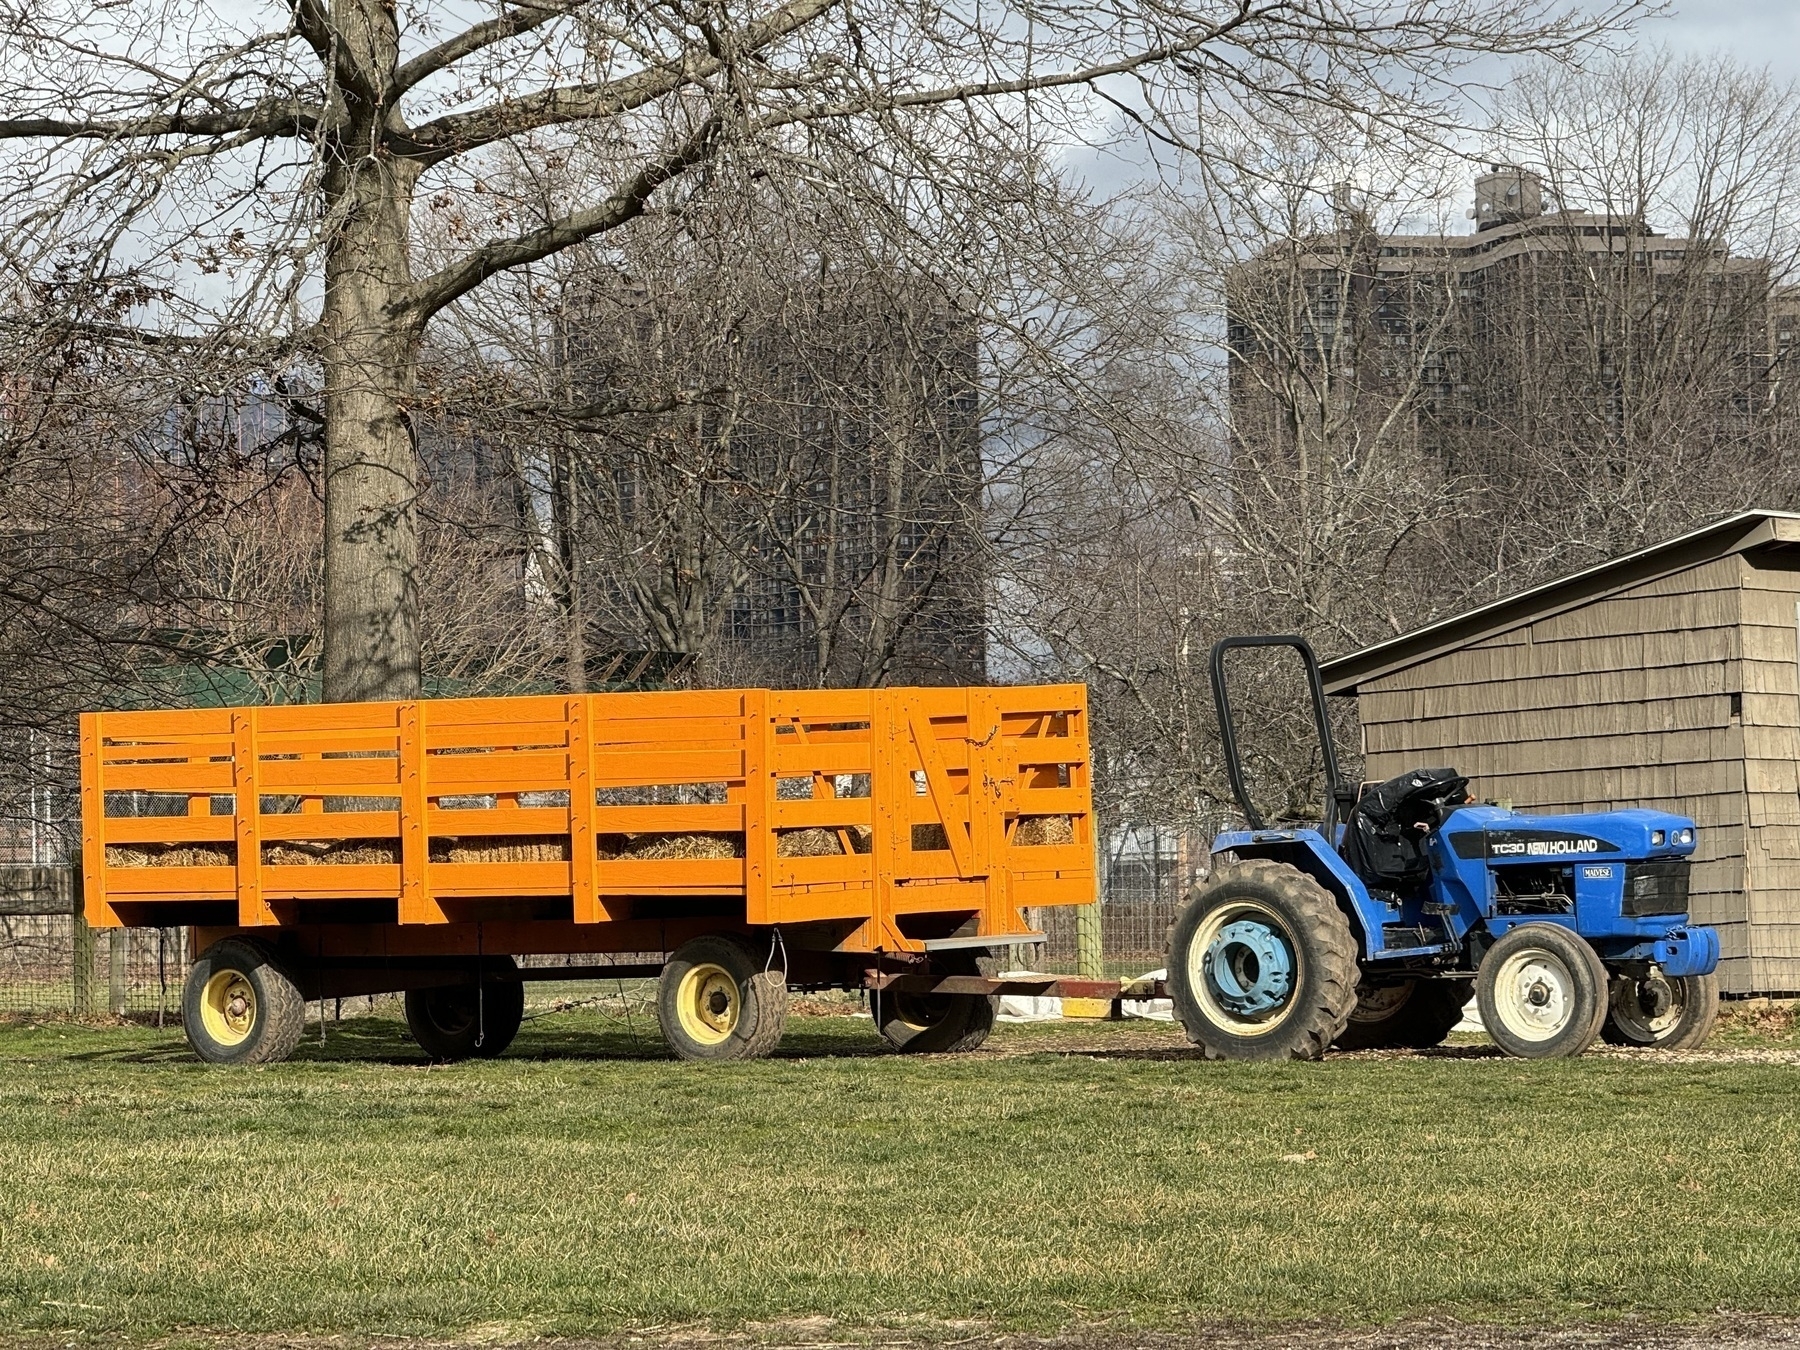 Photograph of a blue tractor with a bright orange trailer attached. In the background there are high rise apartment buildings.